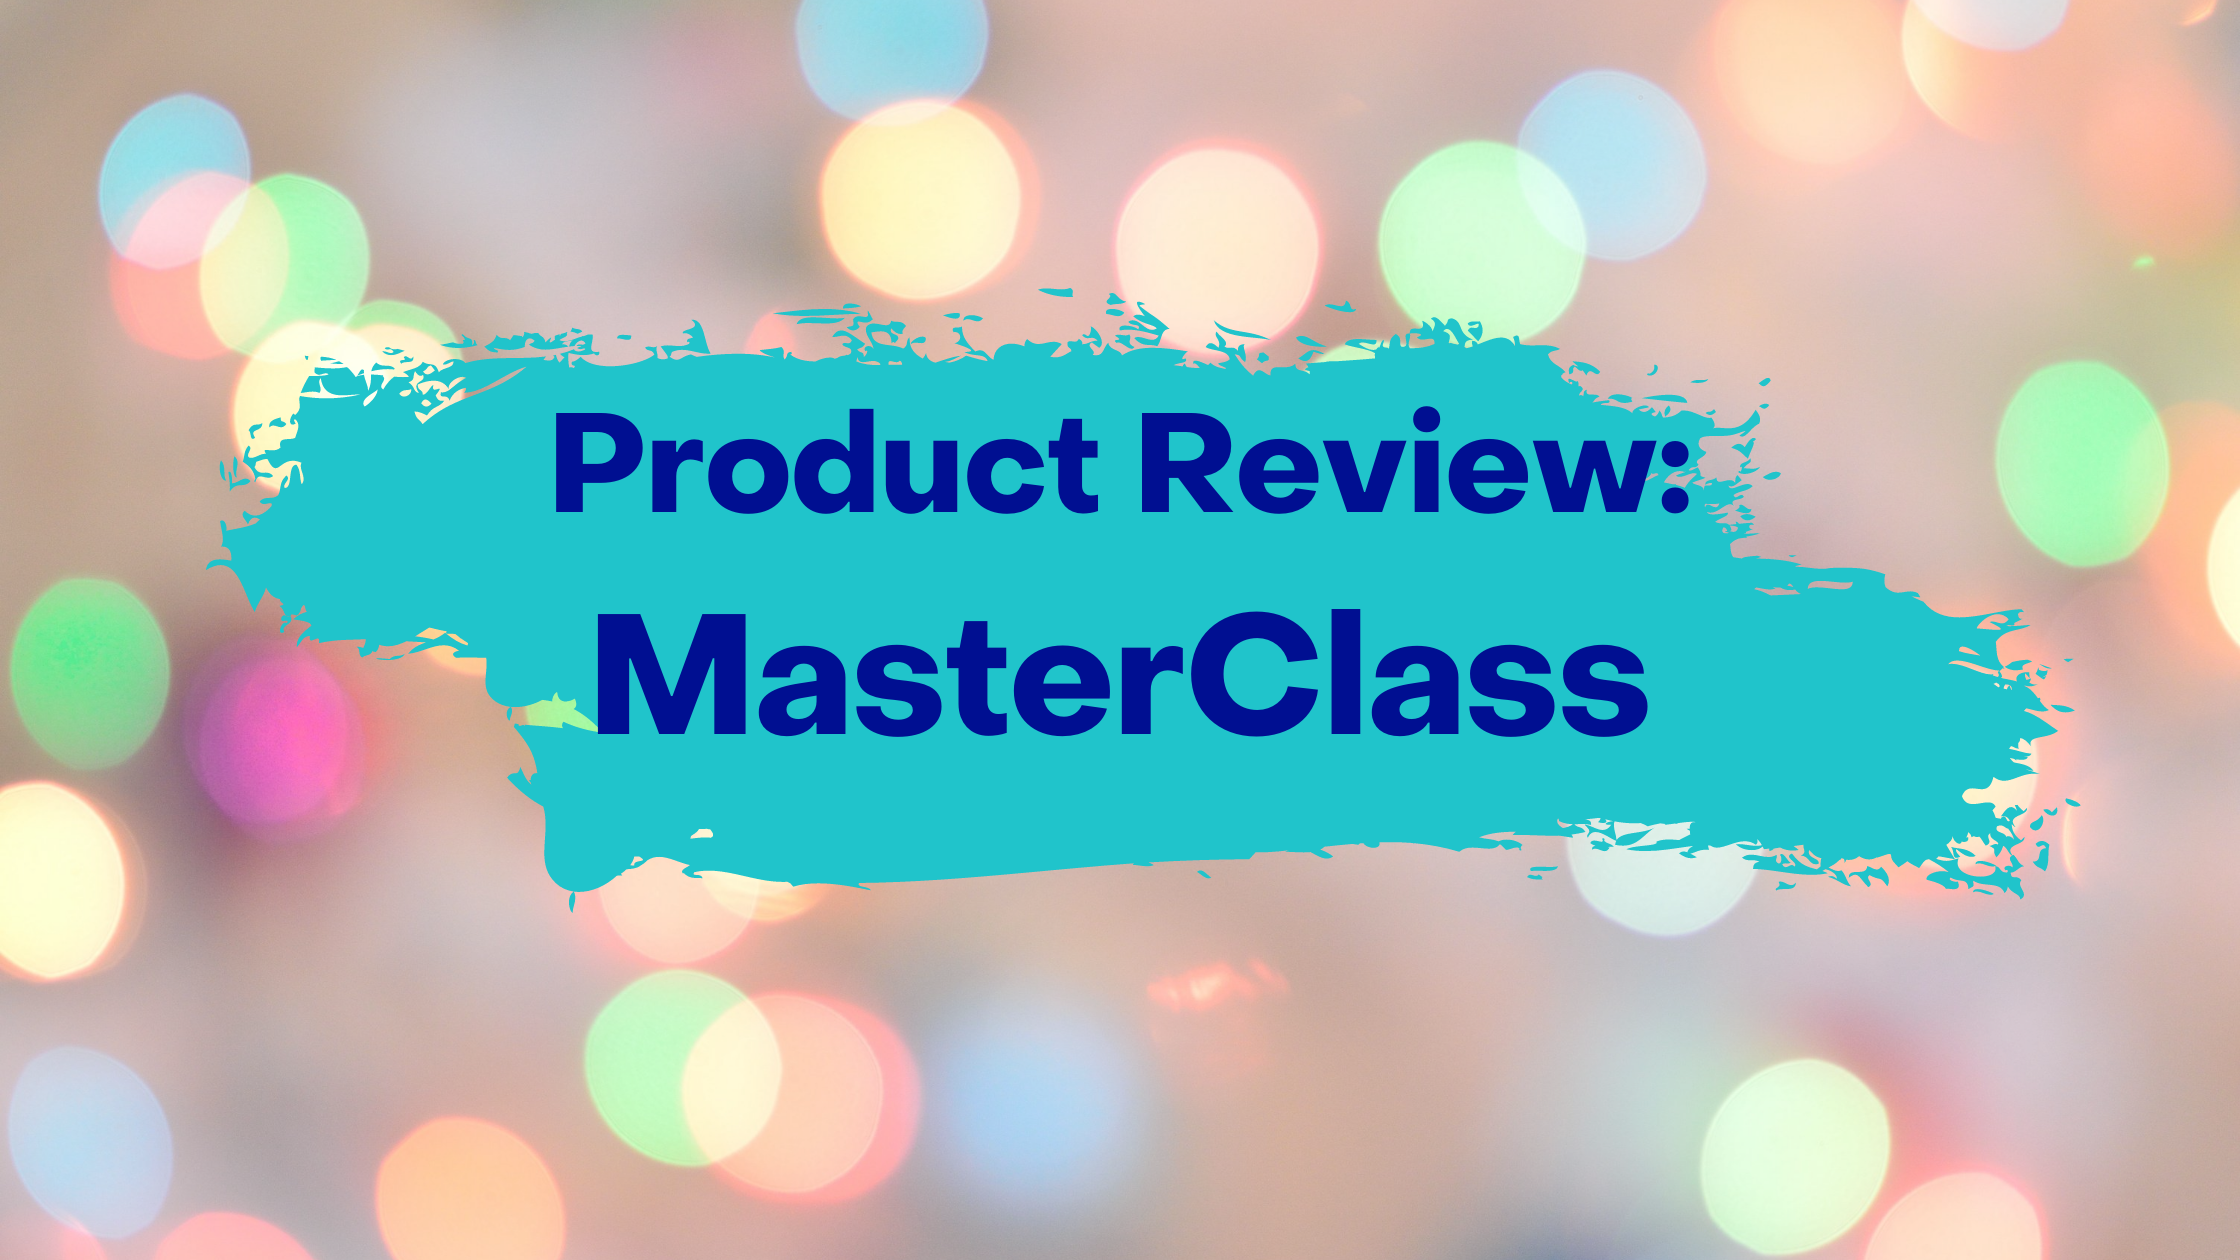 Product Review: MasterClass